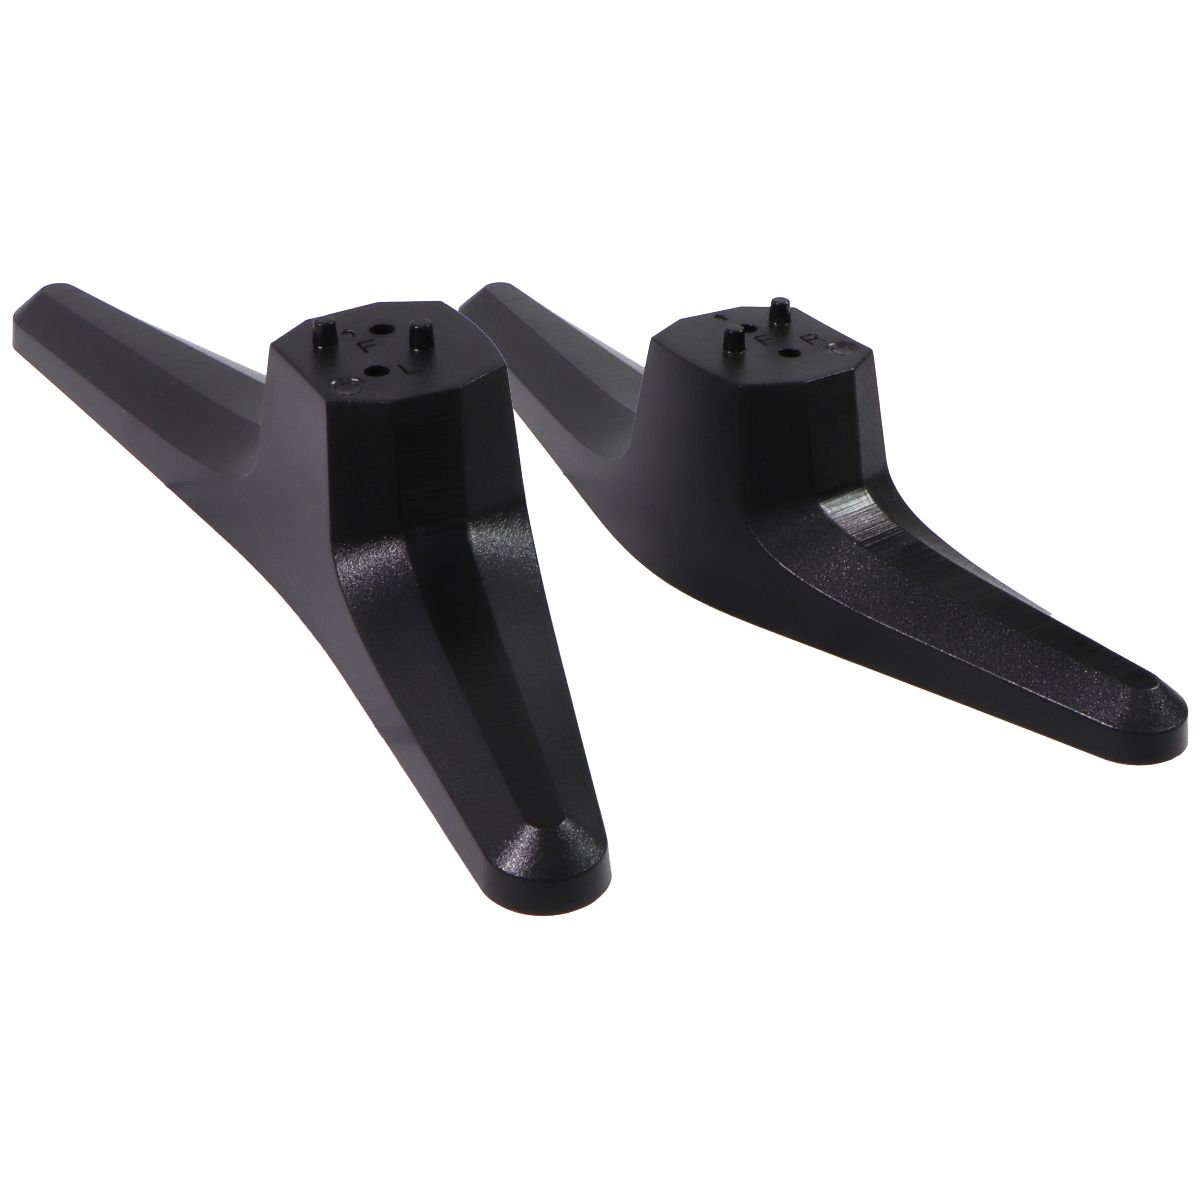 Insignia OEM TV Stand Legs Kit with Hardware for NS-50 / NS-55 / NS-75 TVs